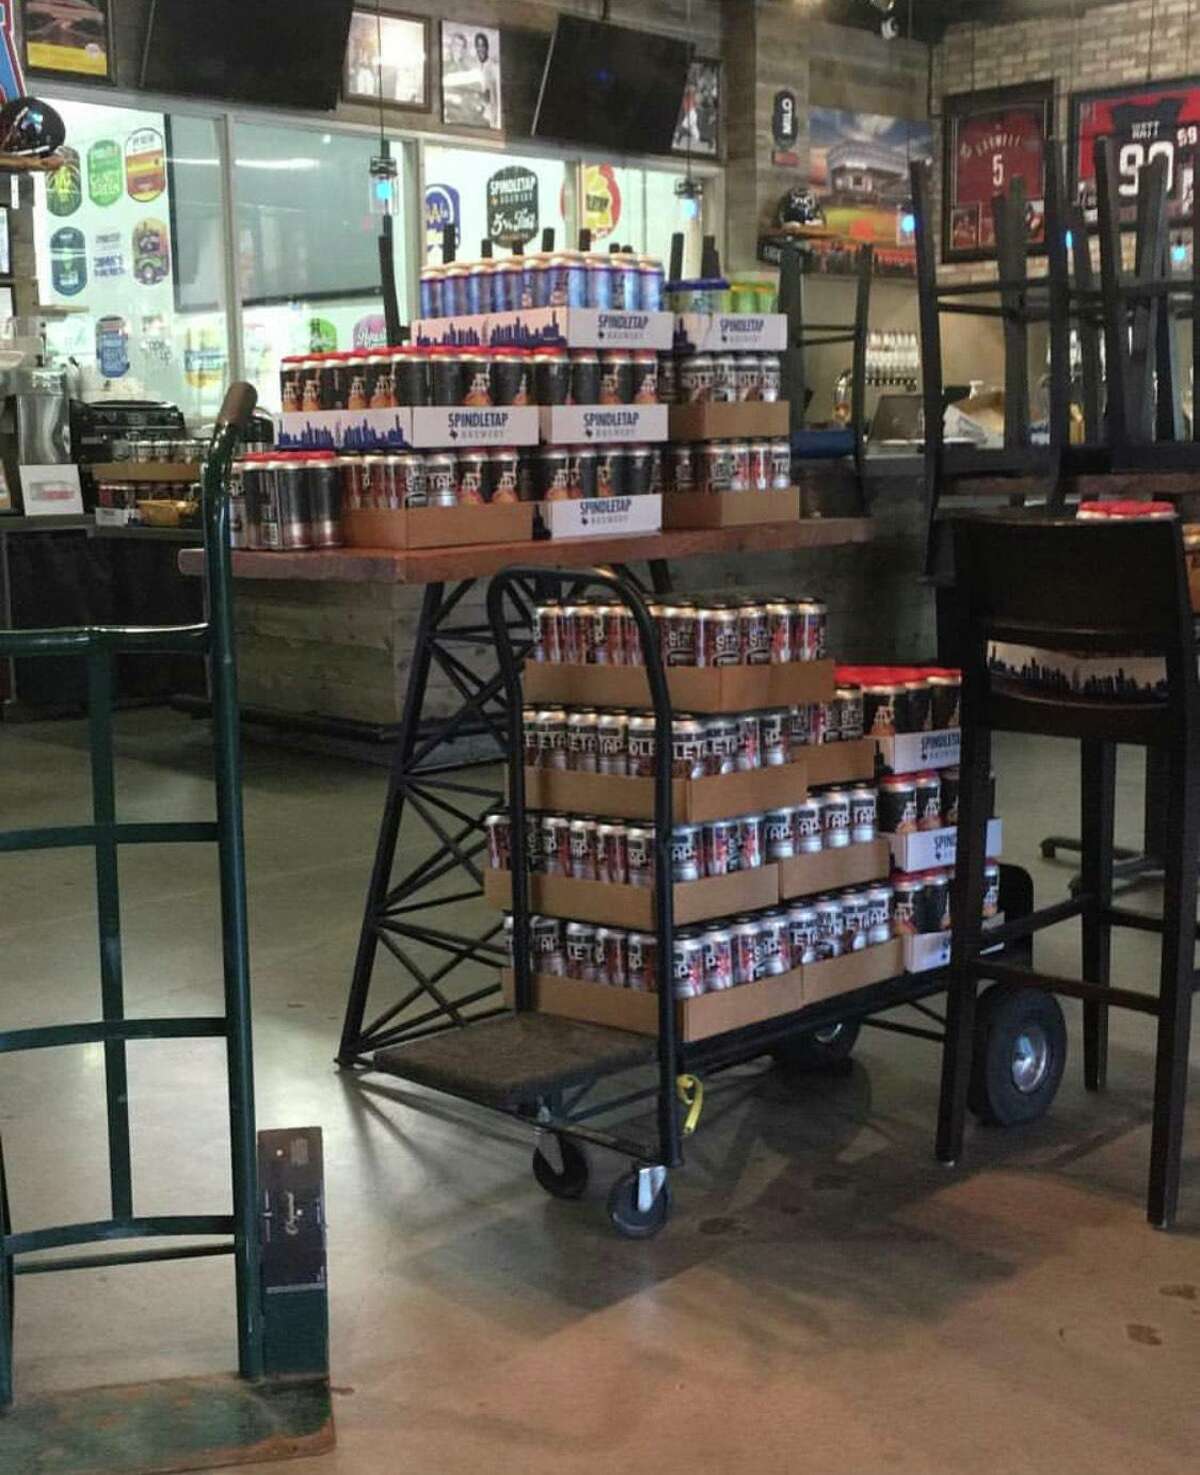 HopDrop, Houston's craft beer delivery service, picked up more than 20 cases of beer from Spindletap Brewery last weekend.